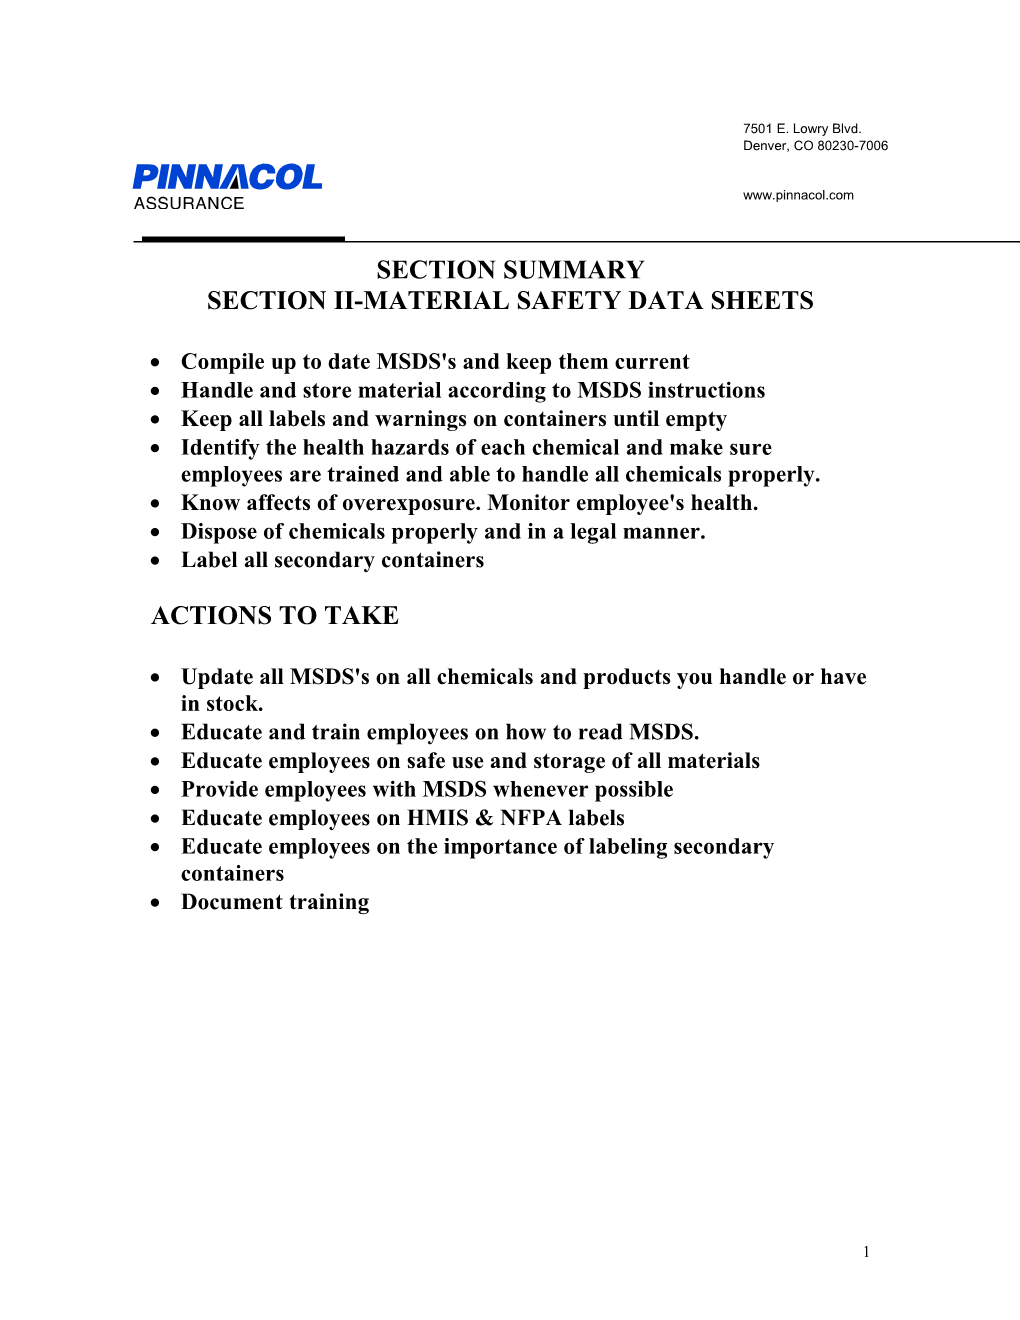 Section Ii-Material Safety Data Sheets